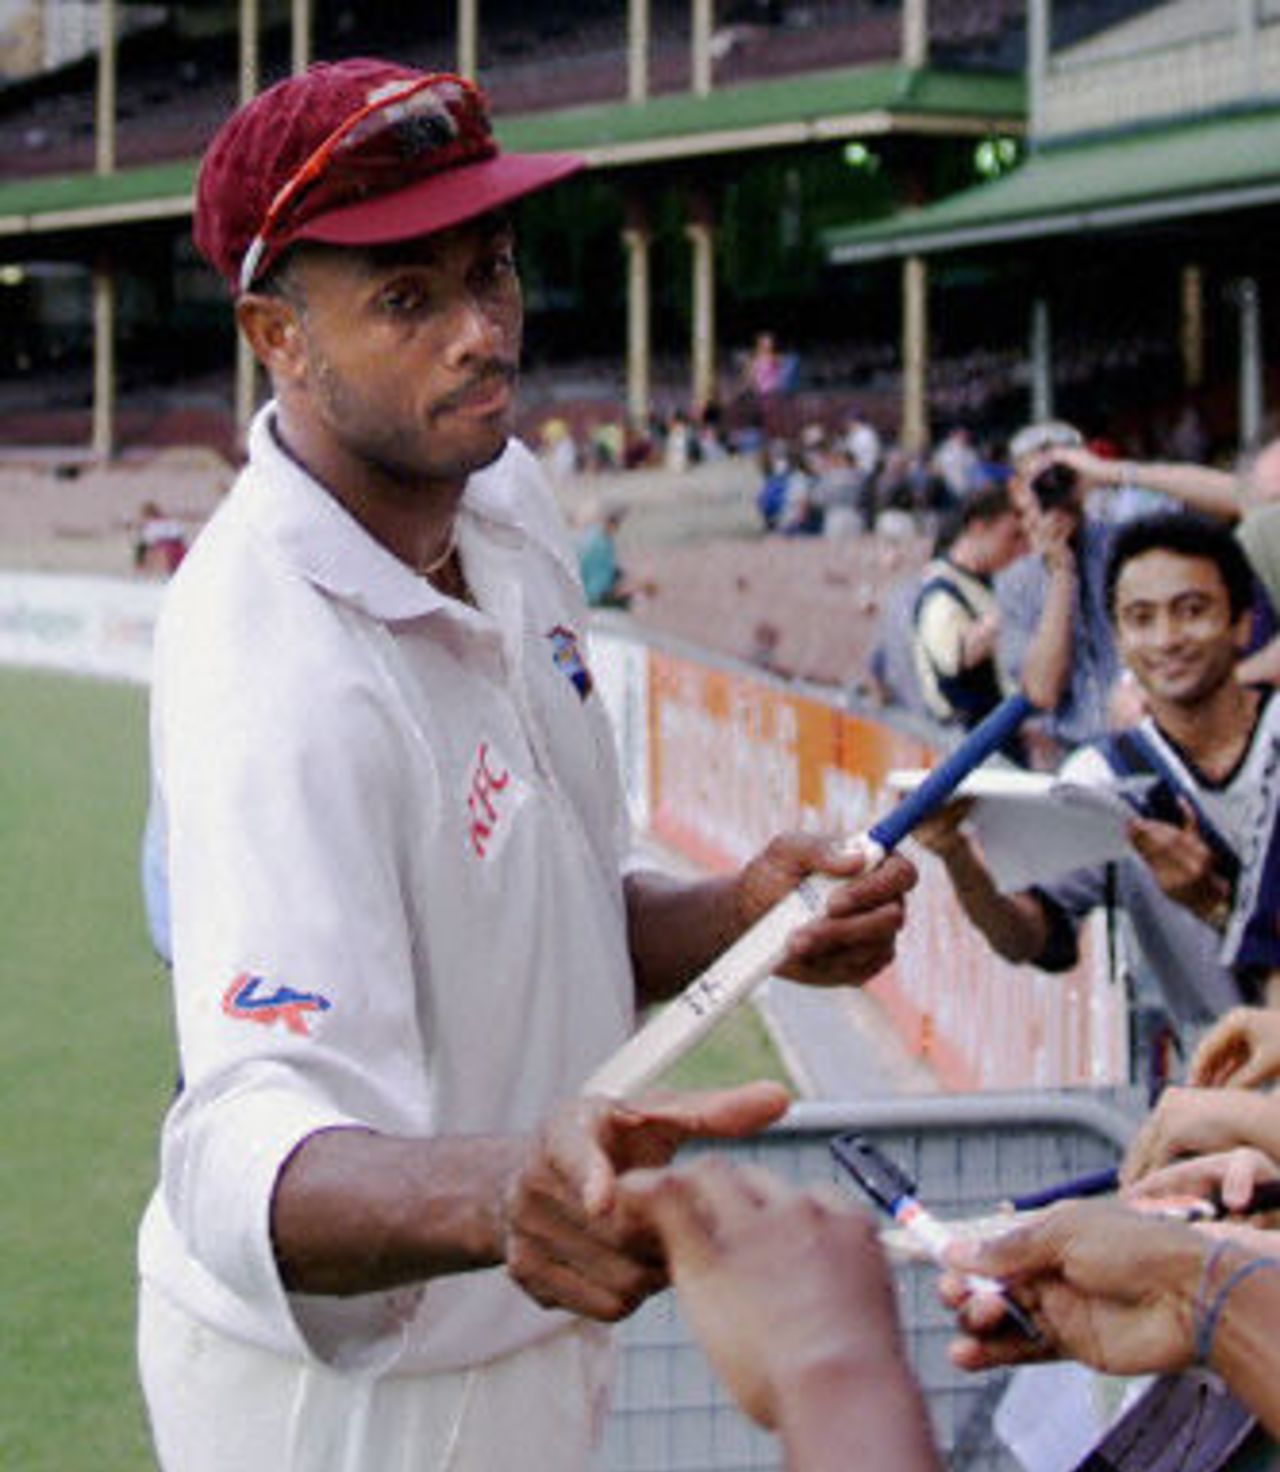 West Indian fast bowler Courtney Walsh signs autographs after the end of play on day four of the Federation test at the Sydney Cricket ground 05 January 2001. Walsh had just completed his last batting spell at the SCG and capped the day off by taking the wicket of top-order Australian batsman Justin Langer.